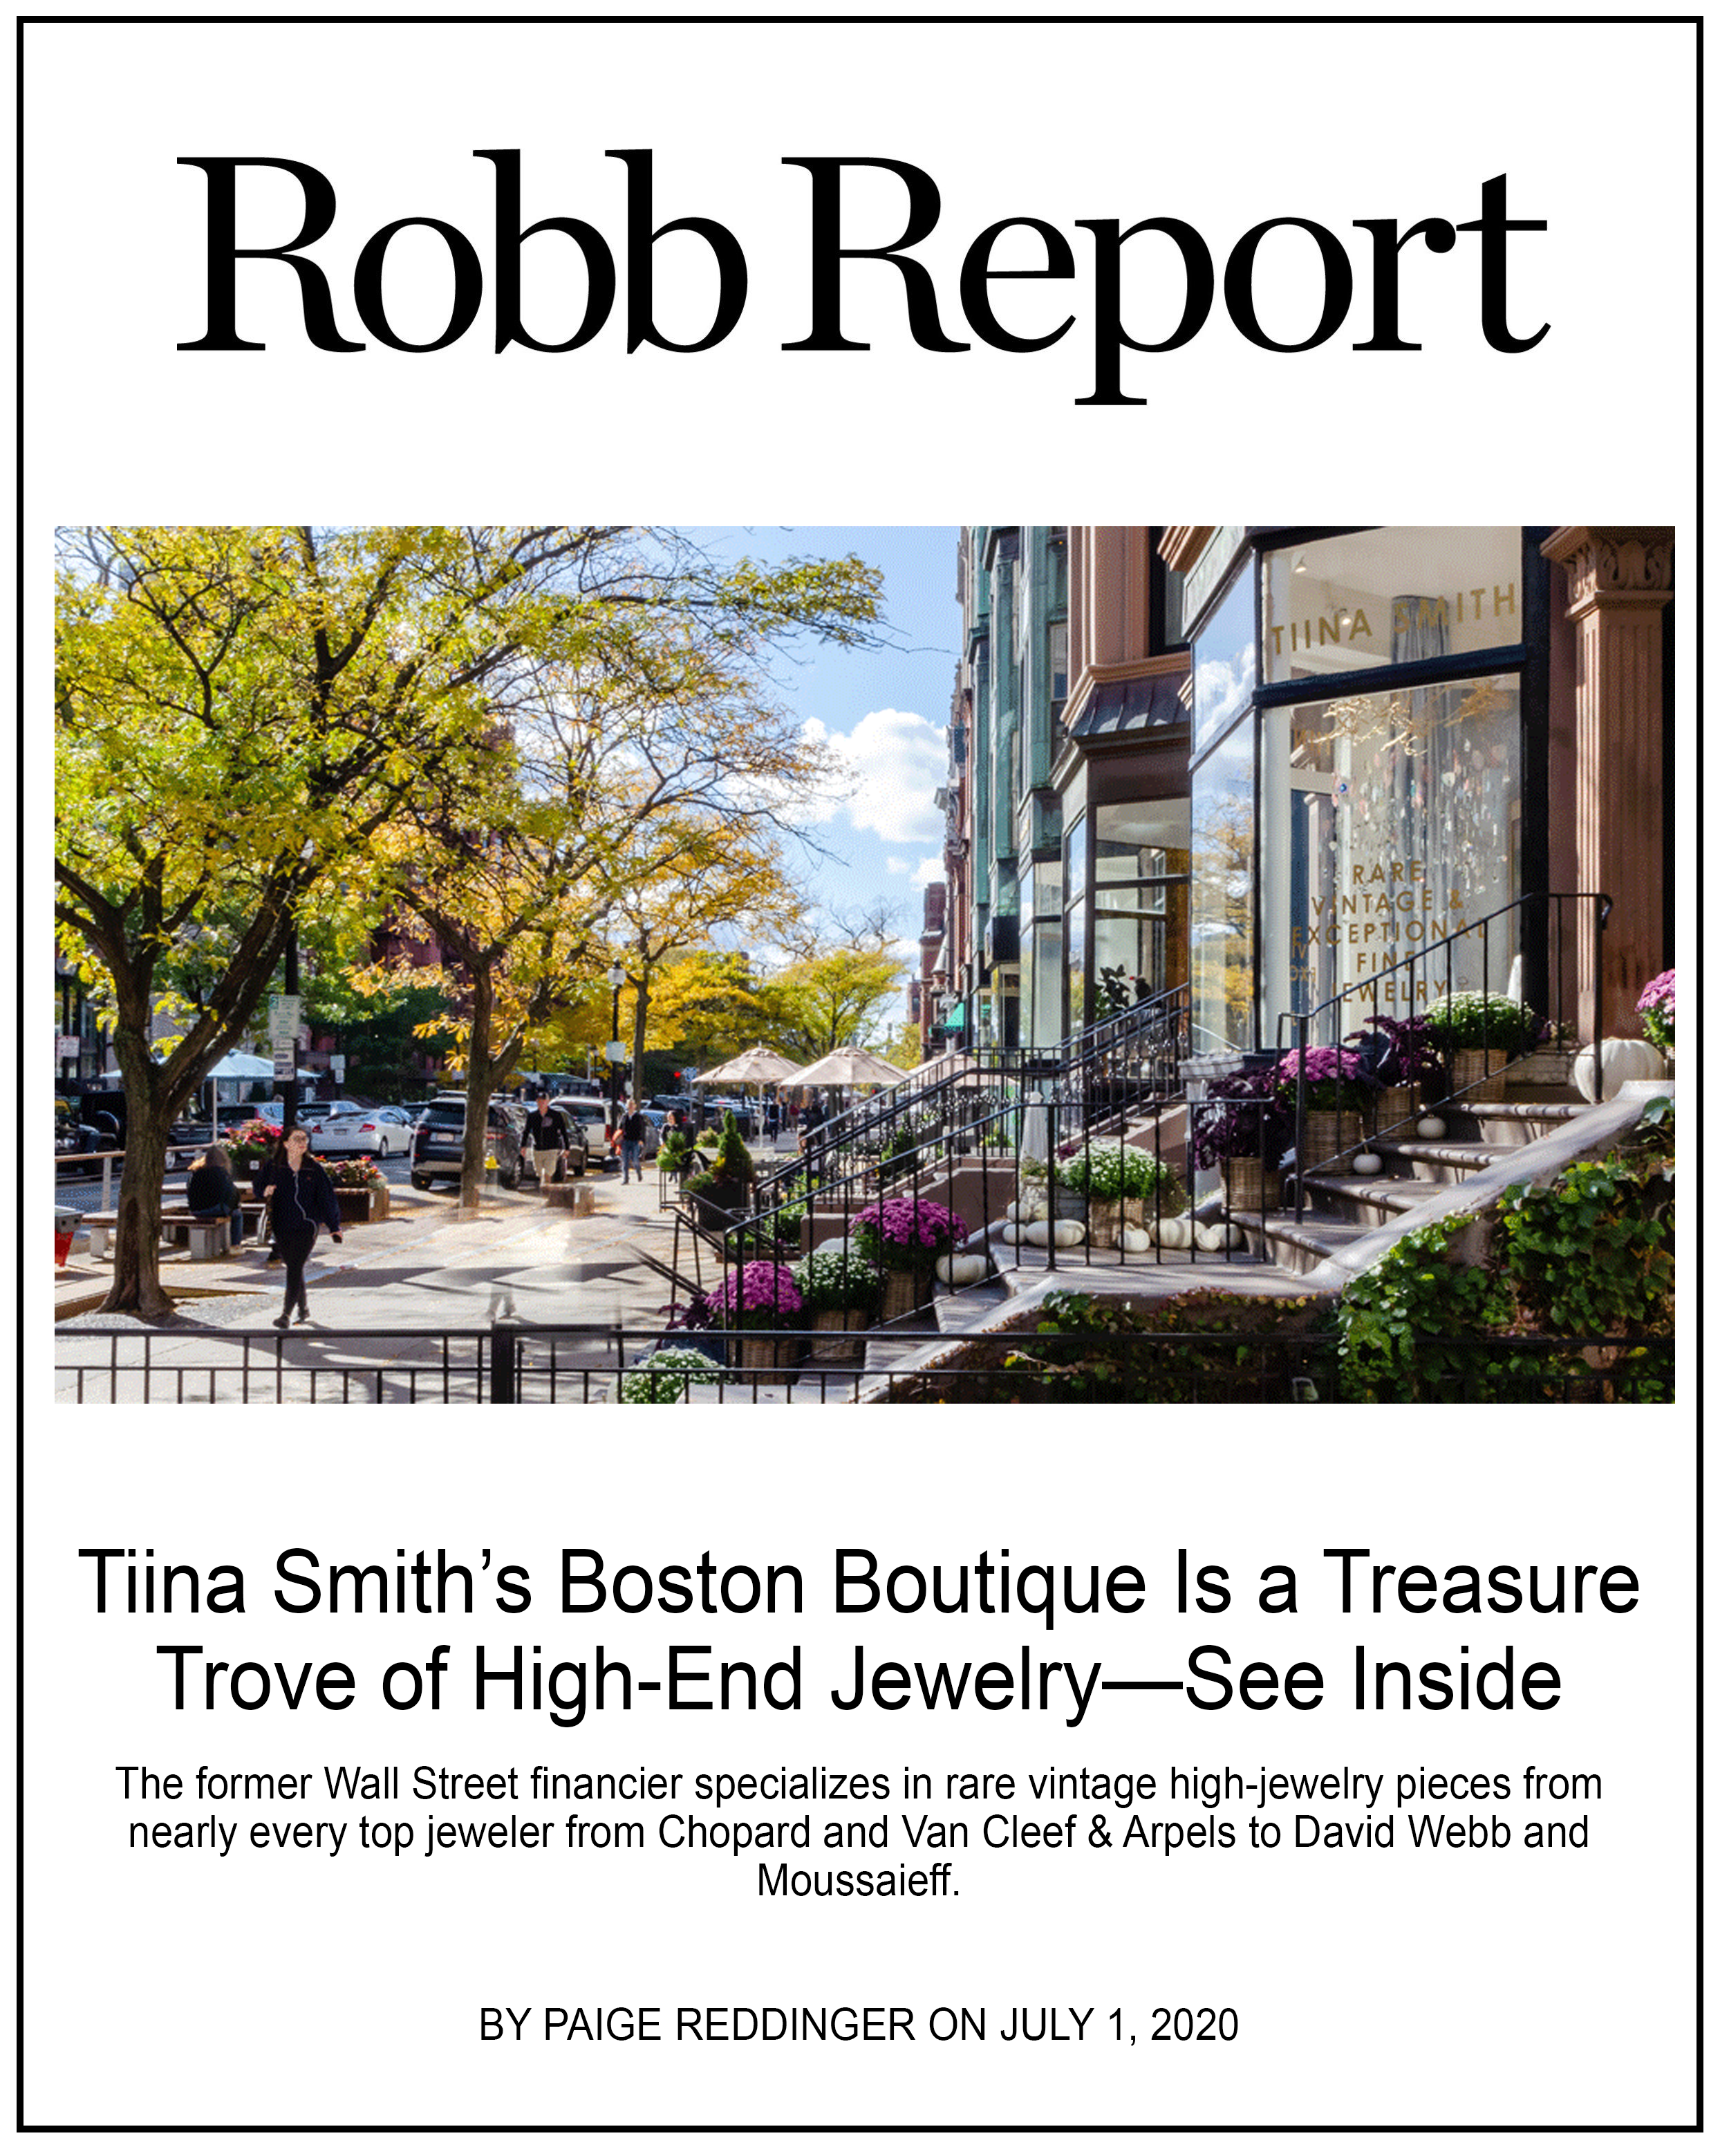 Tiina Smith’s Boston Boutique Is a Treasure Trove of High-End Jewelry—See Inside The former Wall Street financier specializes in rare vintage high-jewelry pieces from nearly every top jeweler from Chopard and Van Cleef & Arpels to David Webb and Moussaieff.